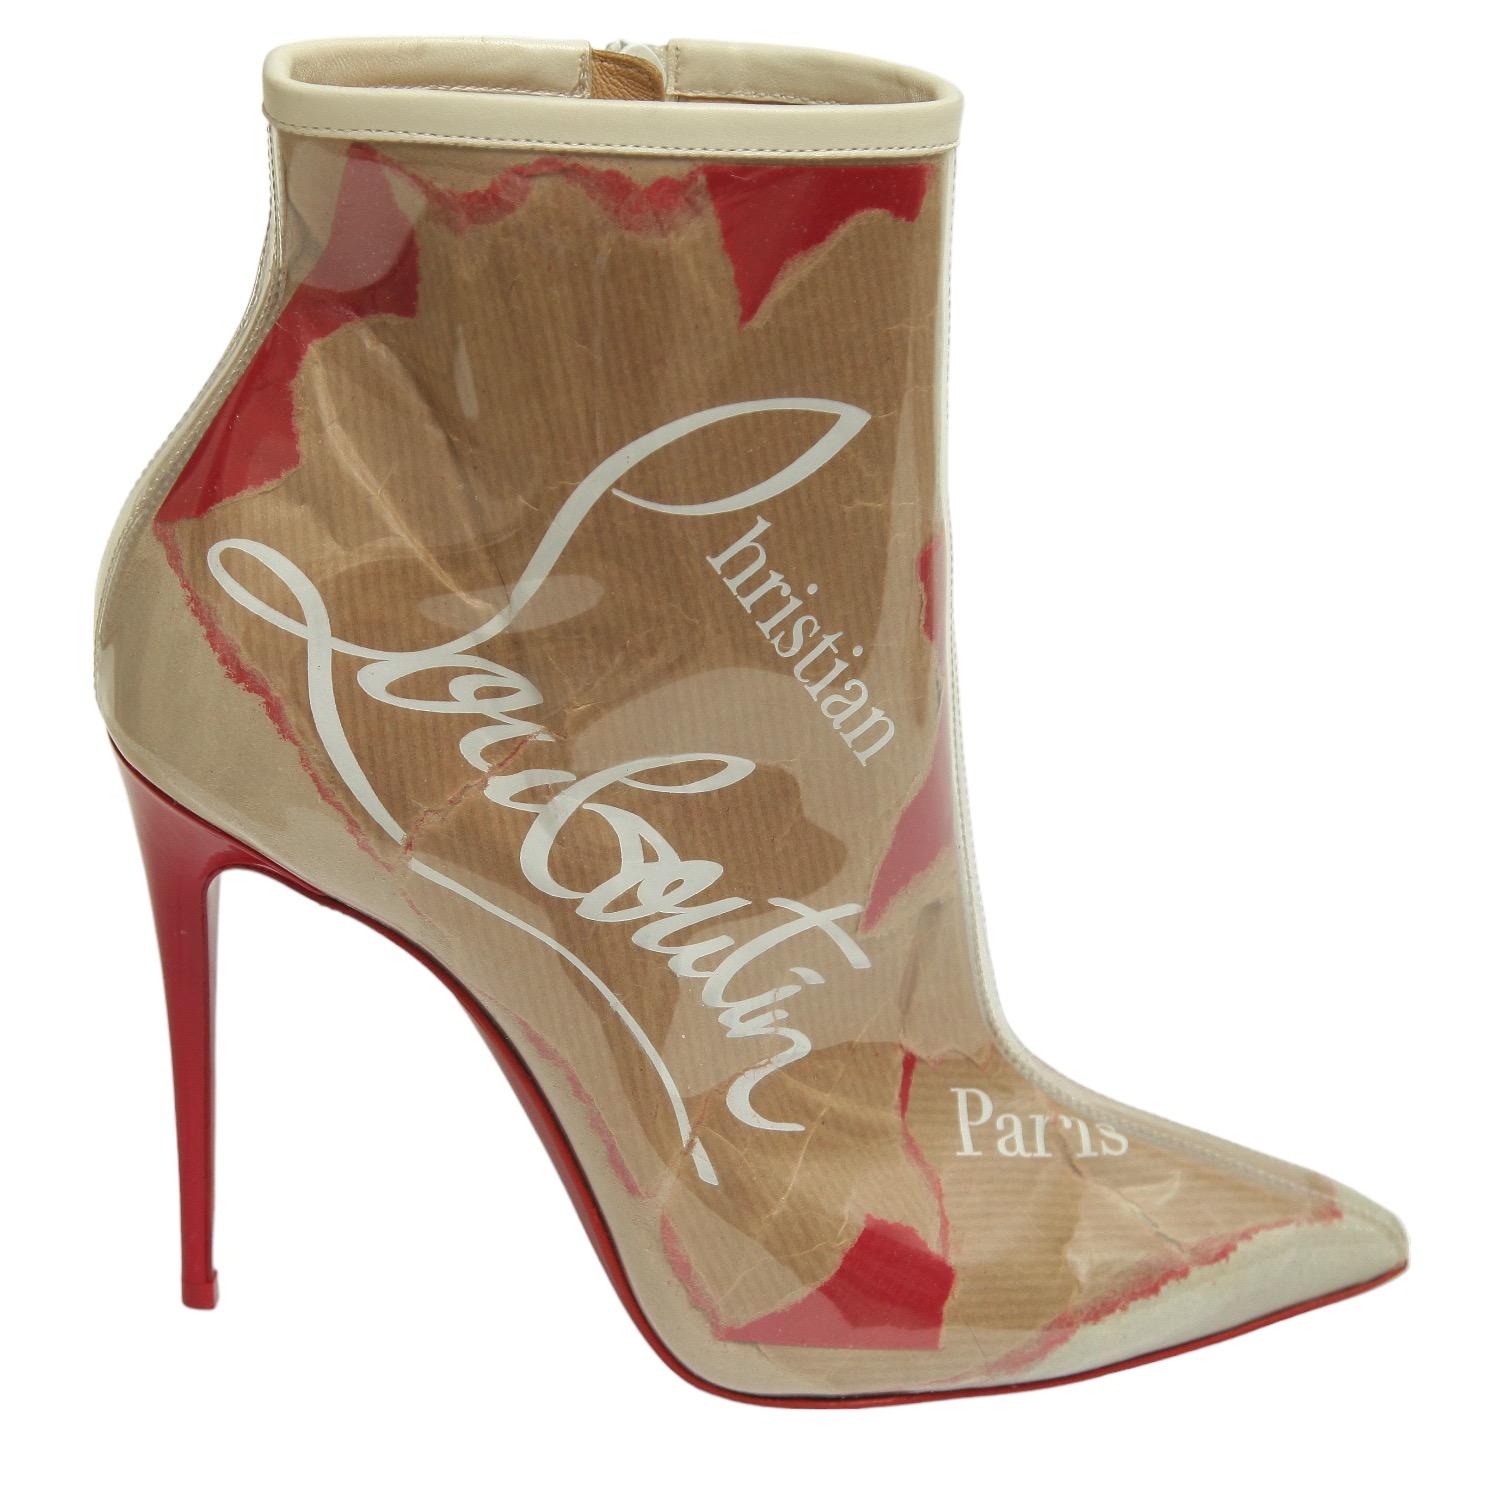 GUARANTEED AUTHENTIC CHRISTIAN LOUBOUTIN PVC LOUBI SO KATE 100 ANKLE BOOTS


Details:
- Torn Louboutin bag pieces under pvc.
- Pointed toe.
- White leather trim at top.
- Zip side closure.
- Red patent leather heels.
- Signature red soles.
- Comes